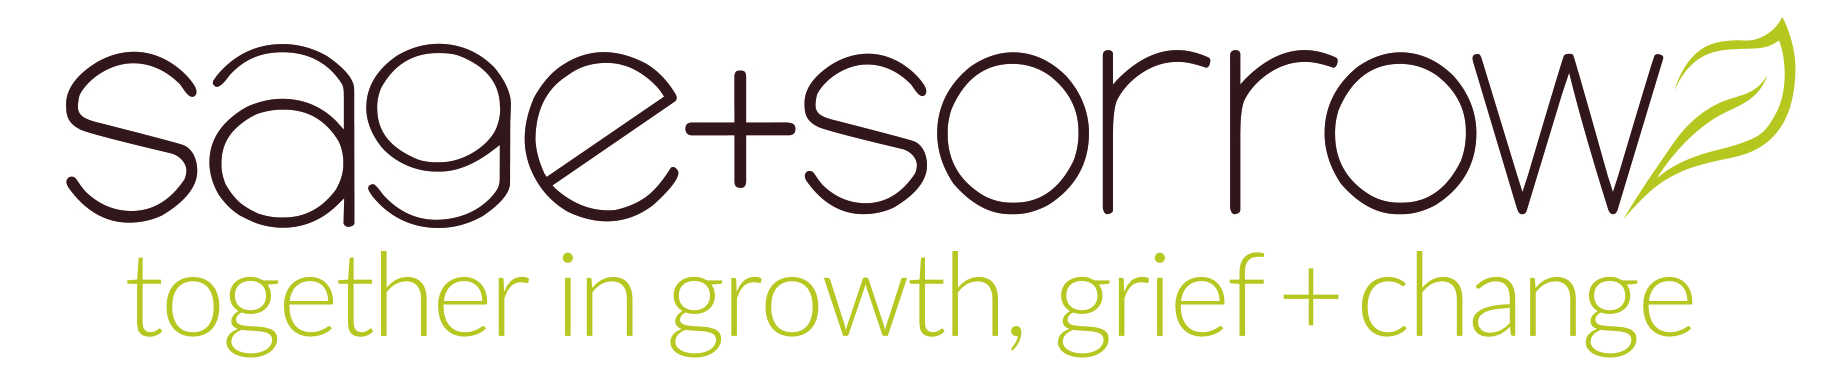 sage and sorrow logo with leaf icon and tag line